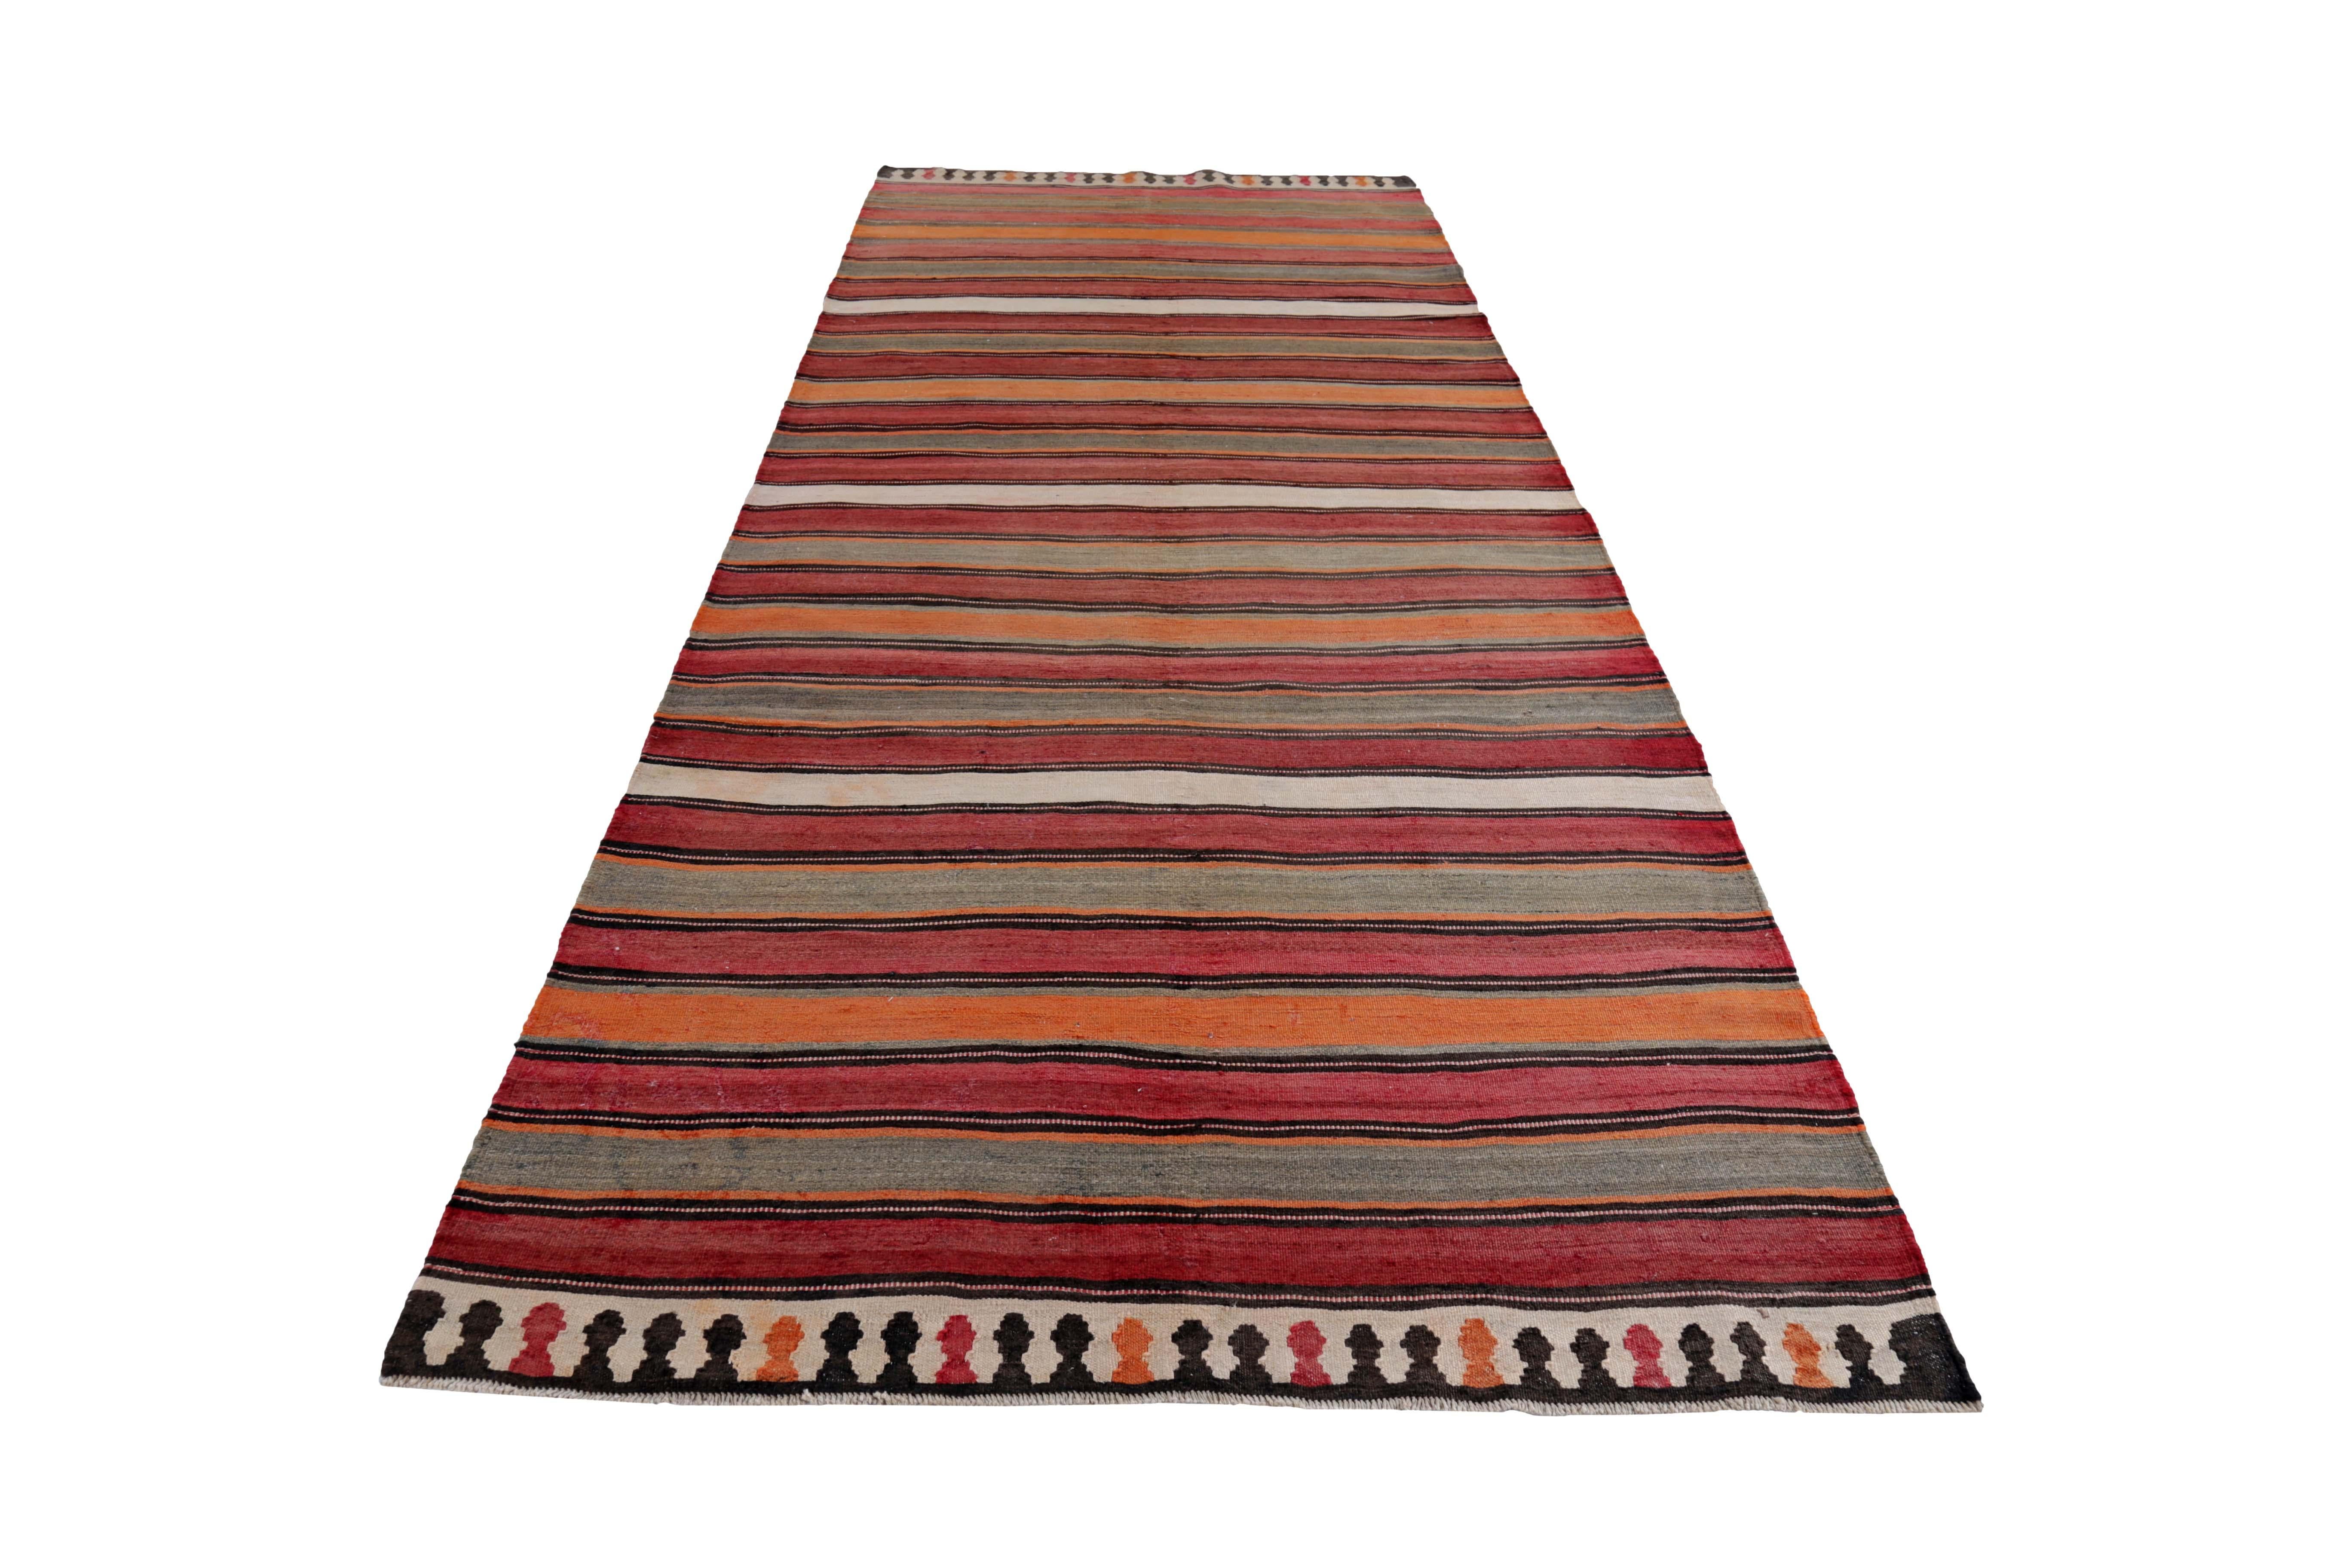 Turkish rug handwoven from the finest sheep’s wool and colored with all-natural vegetable dyes that are safe for humans and pets. It’s a traditional Kilim flat-weave design featuring red, orange and ivory stripes pattern. It’s a stunning piece to